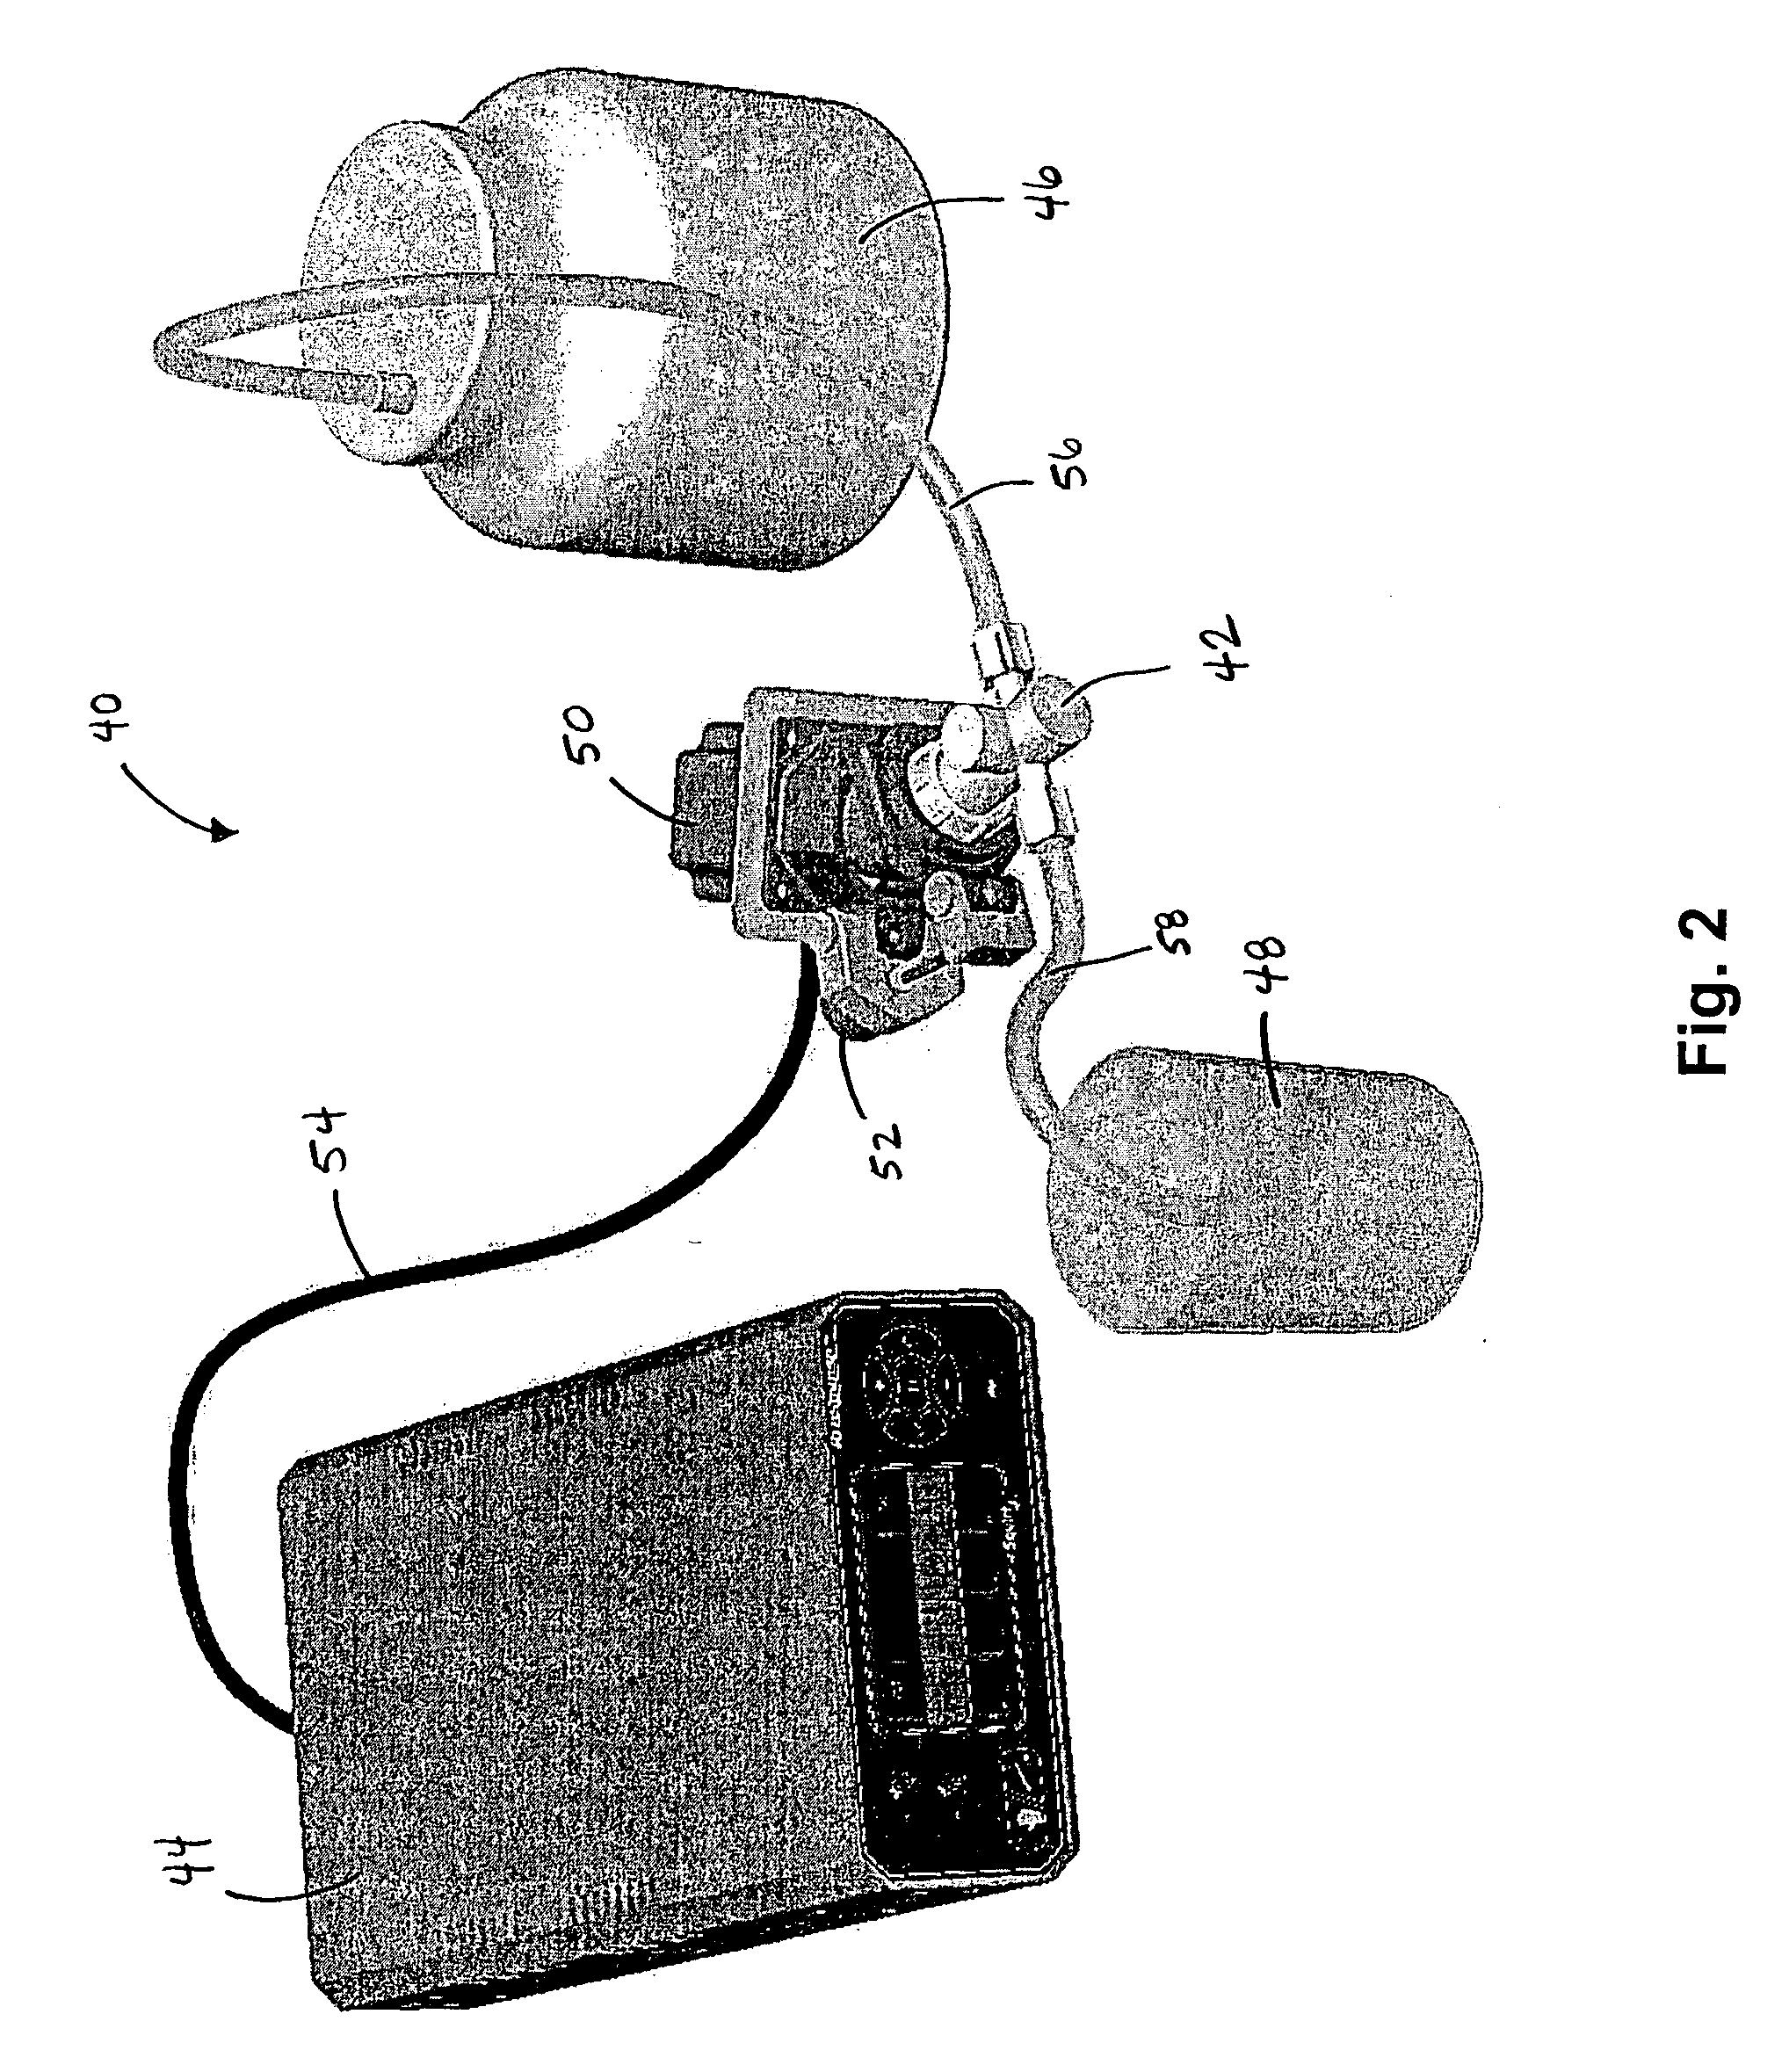 Systems and methods for providing a dynamically adjustable reciprocating fluid dispenser